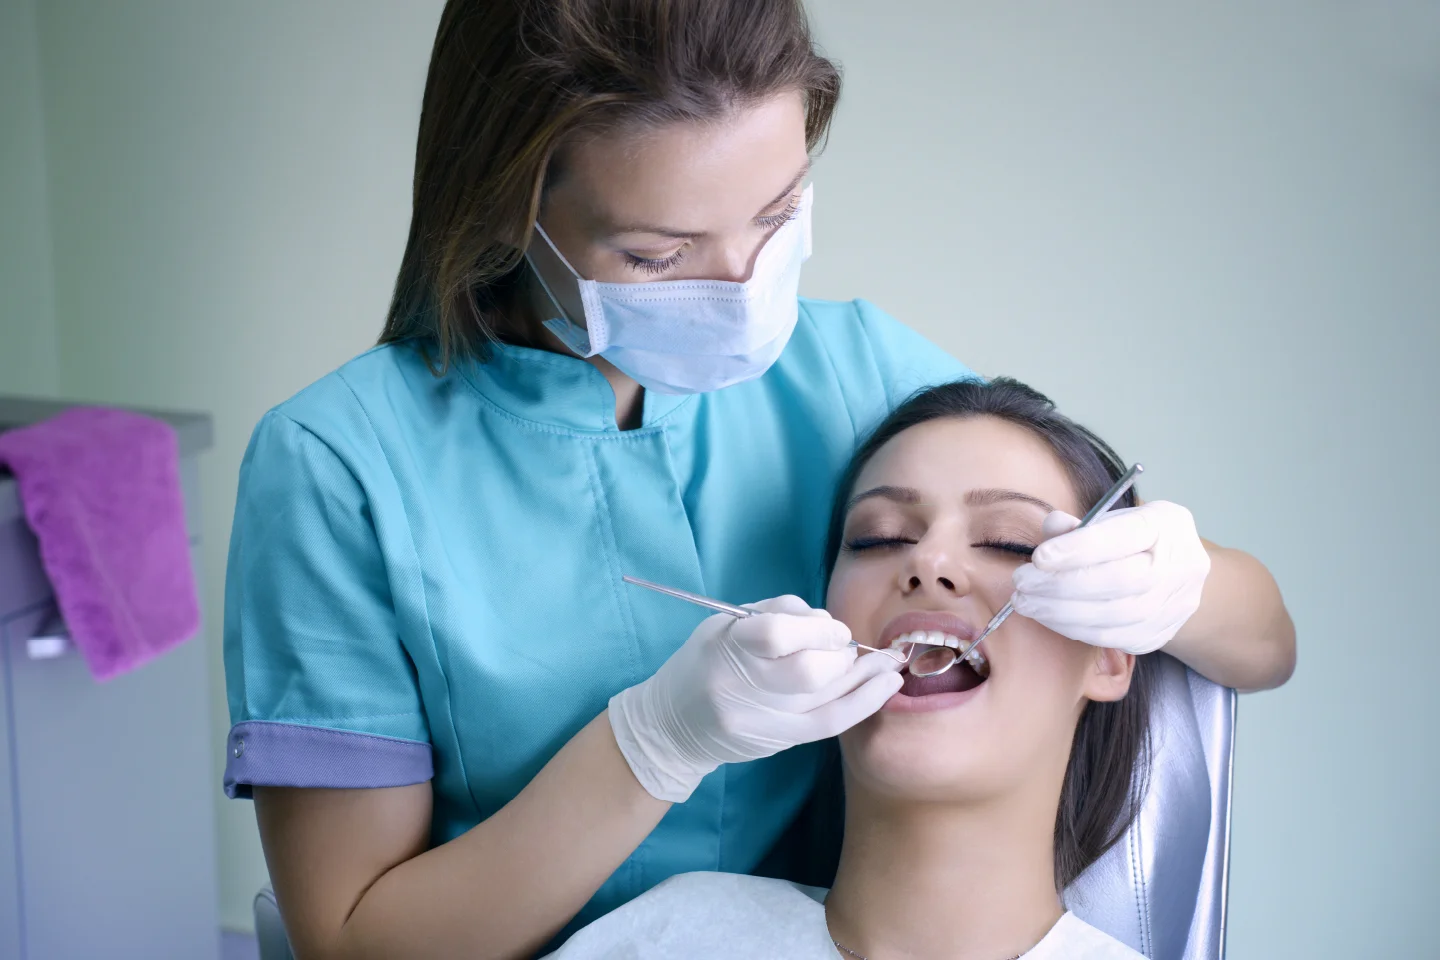 Care During Orthodontic Treatment